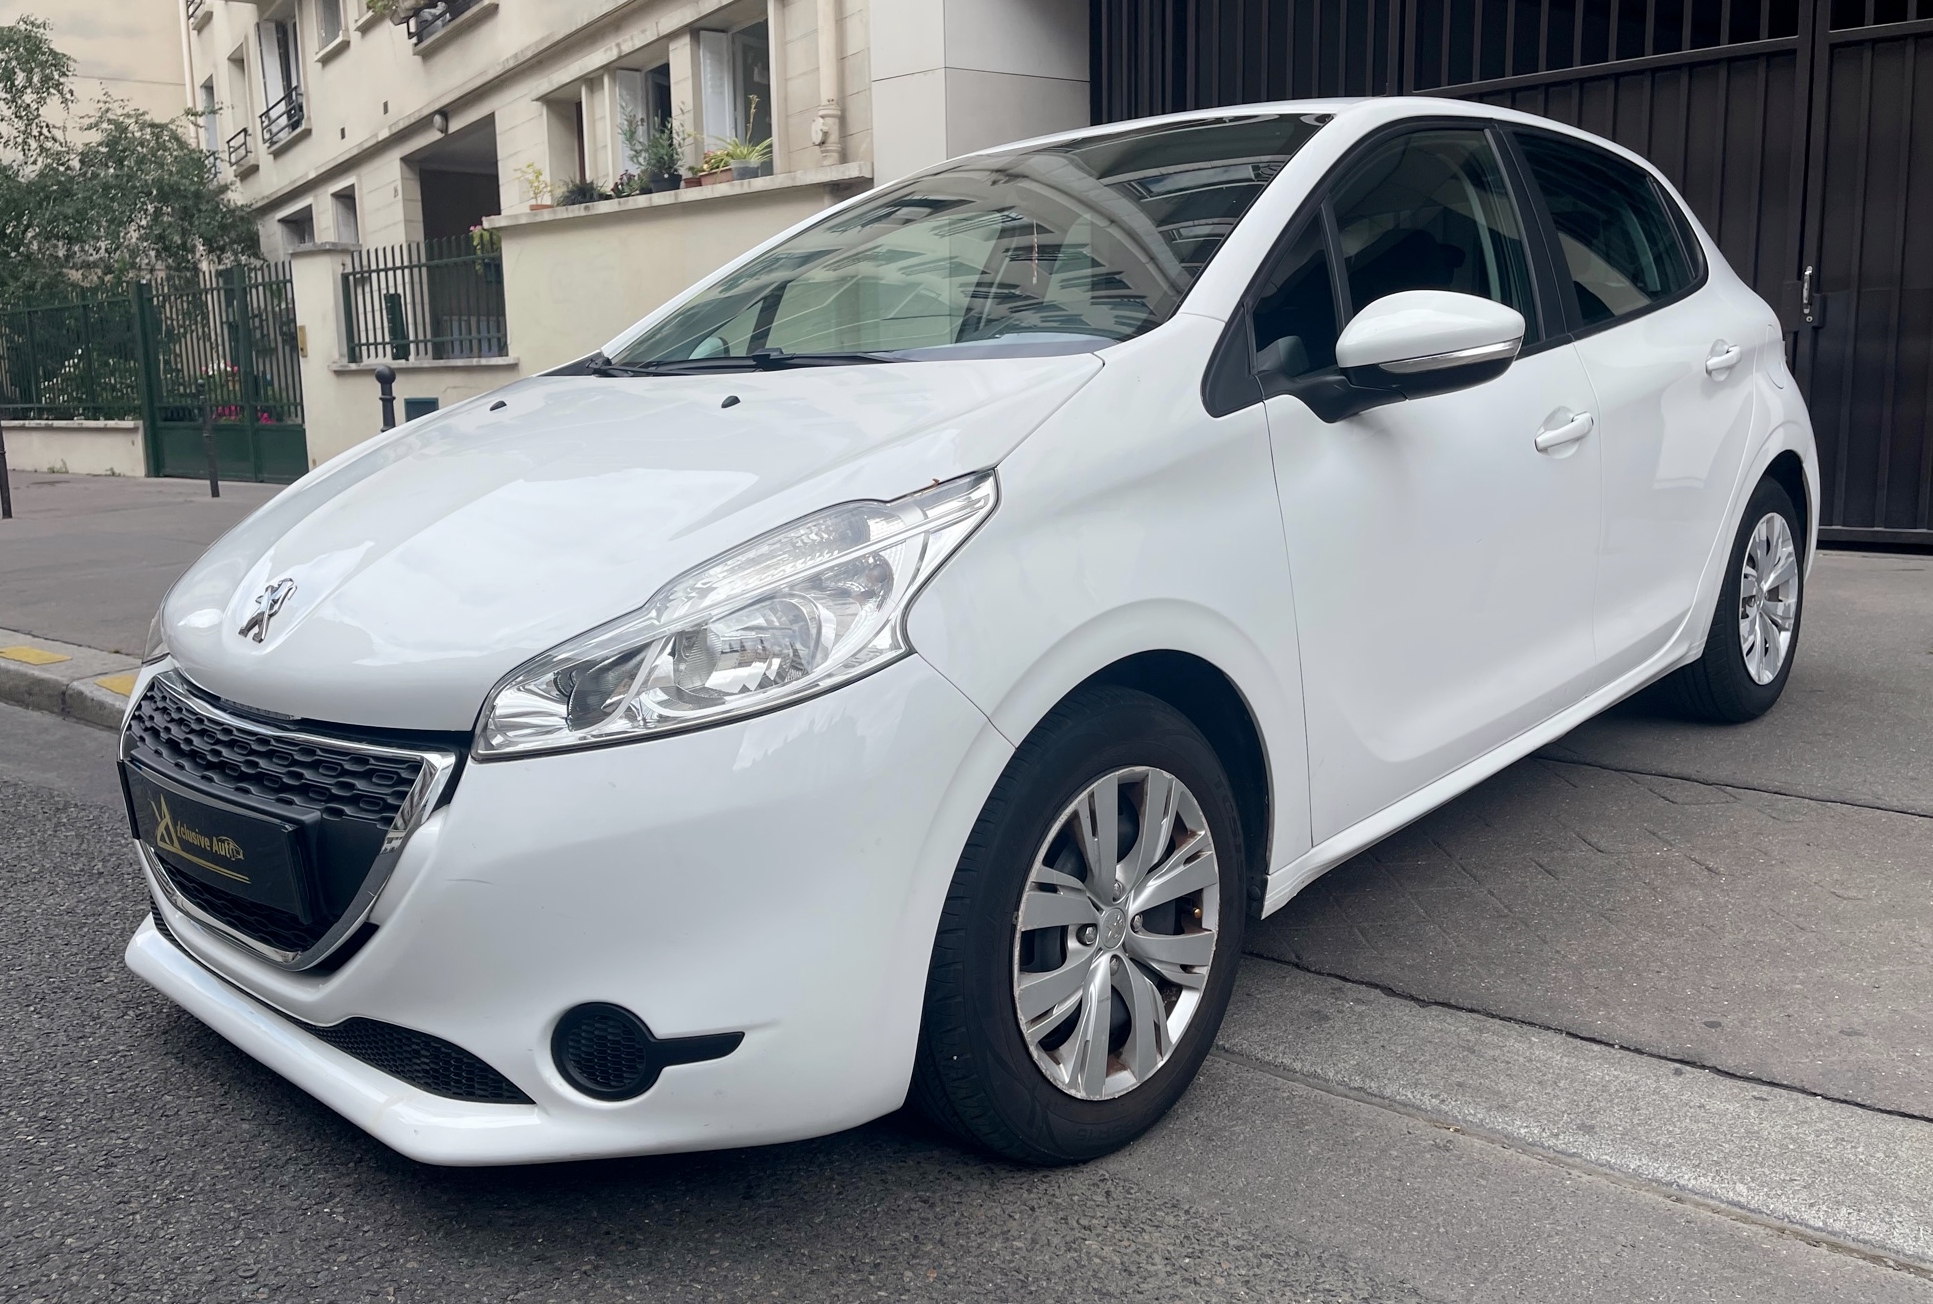 PEUGEOT 208 1.4 HDI 68 ACTIVE 6